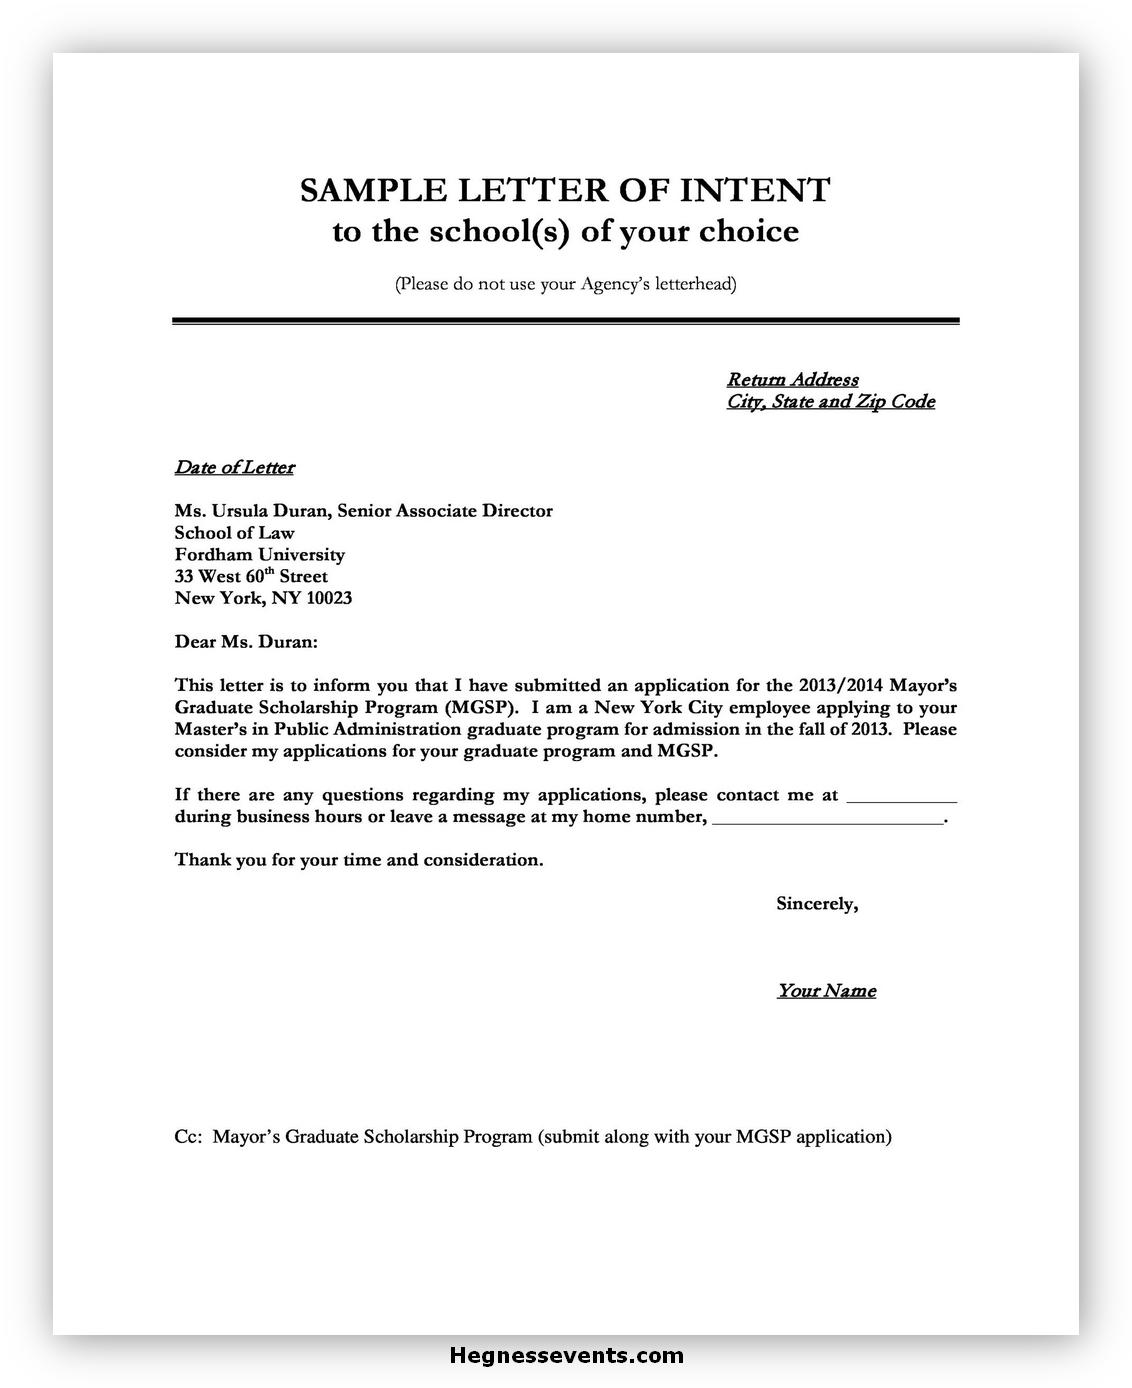 Letter of Intent Template 03